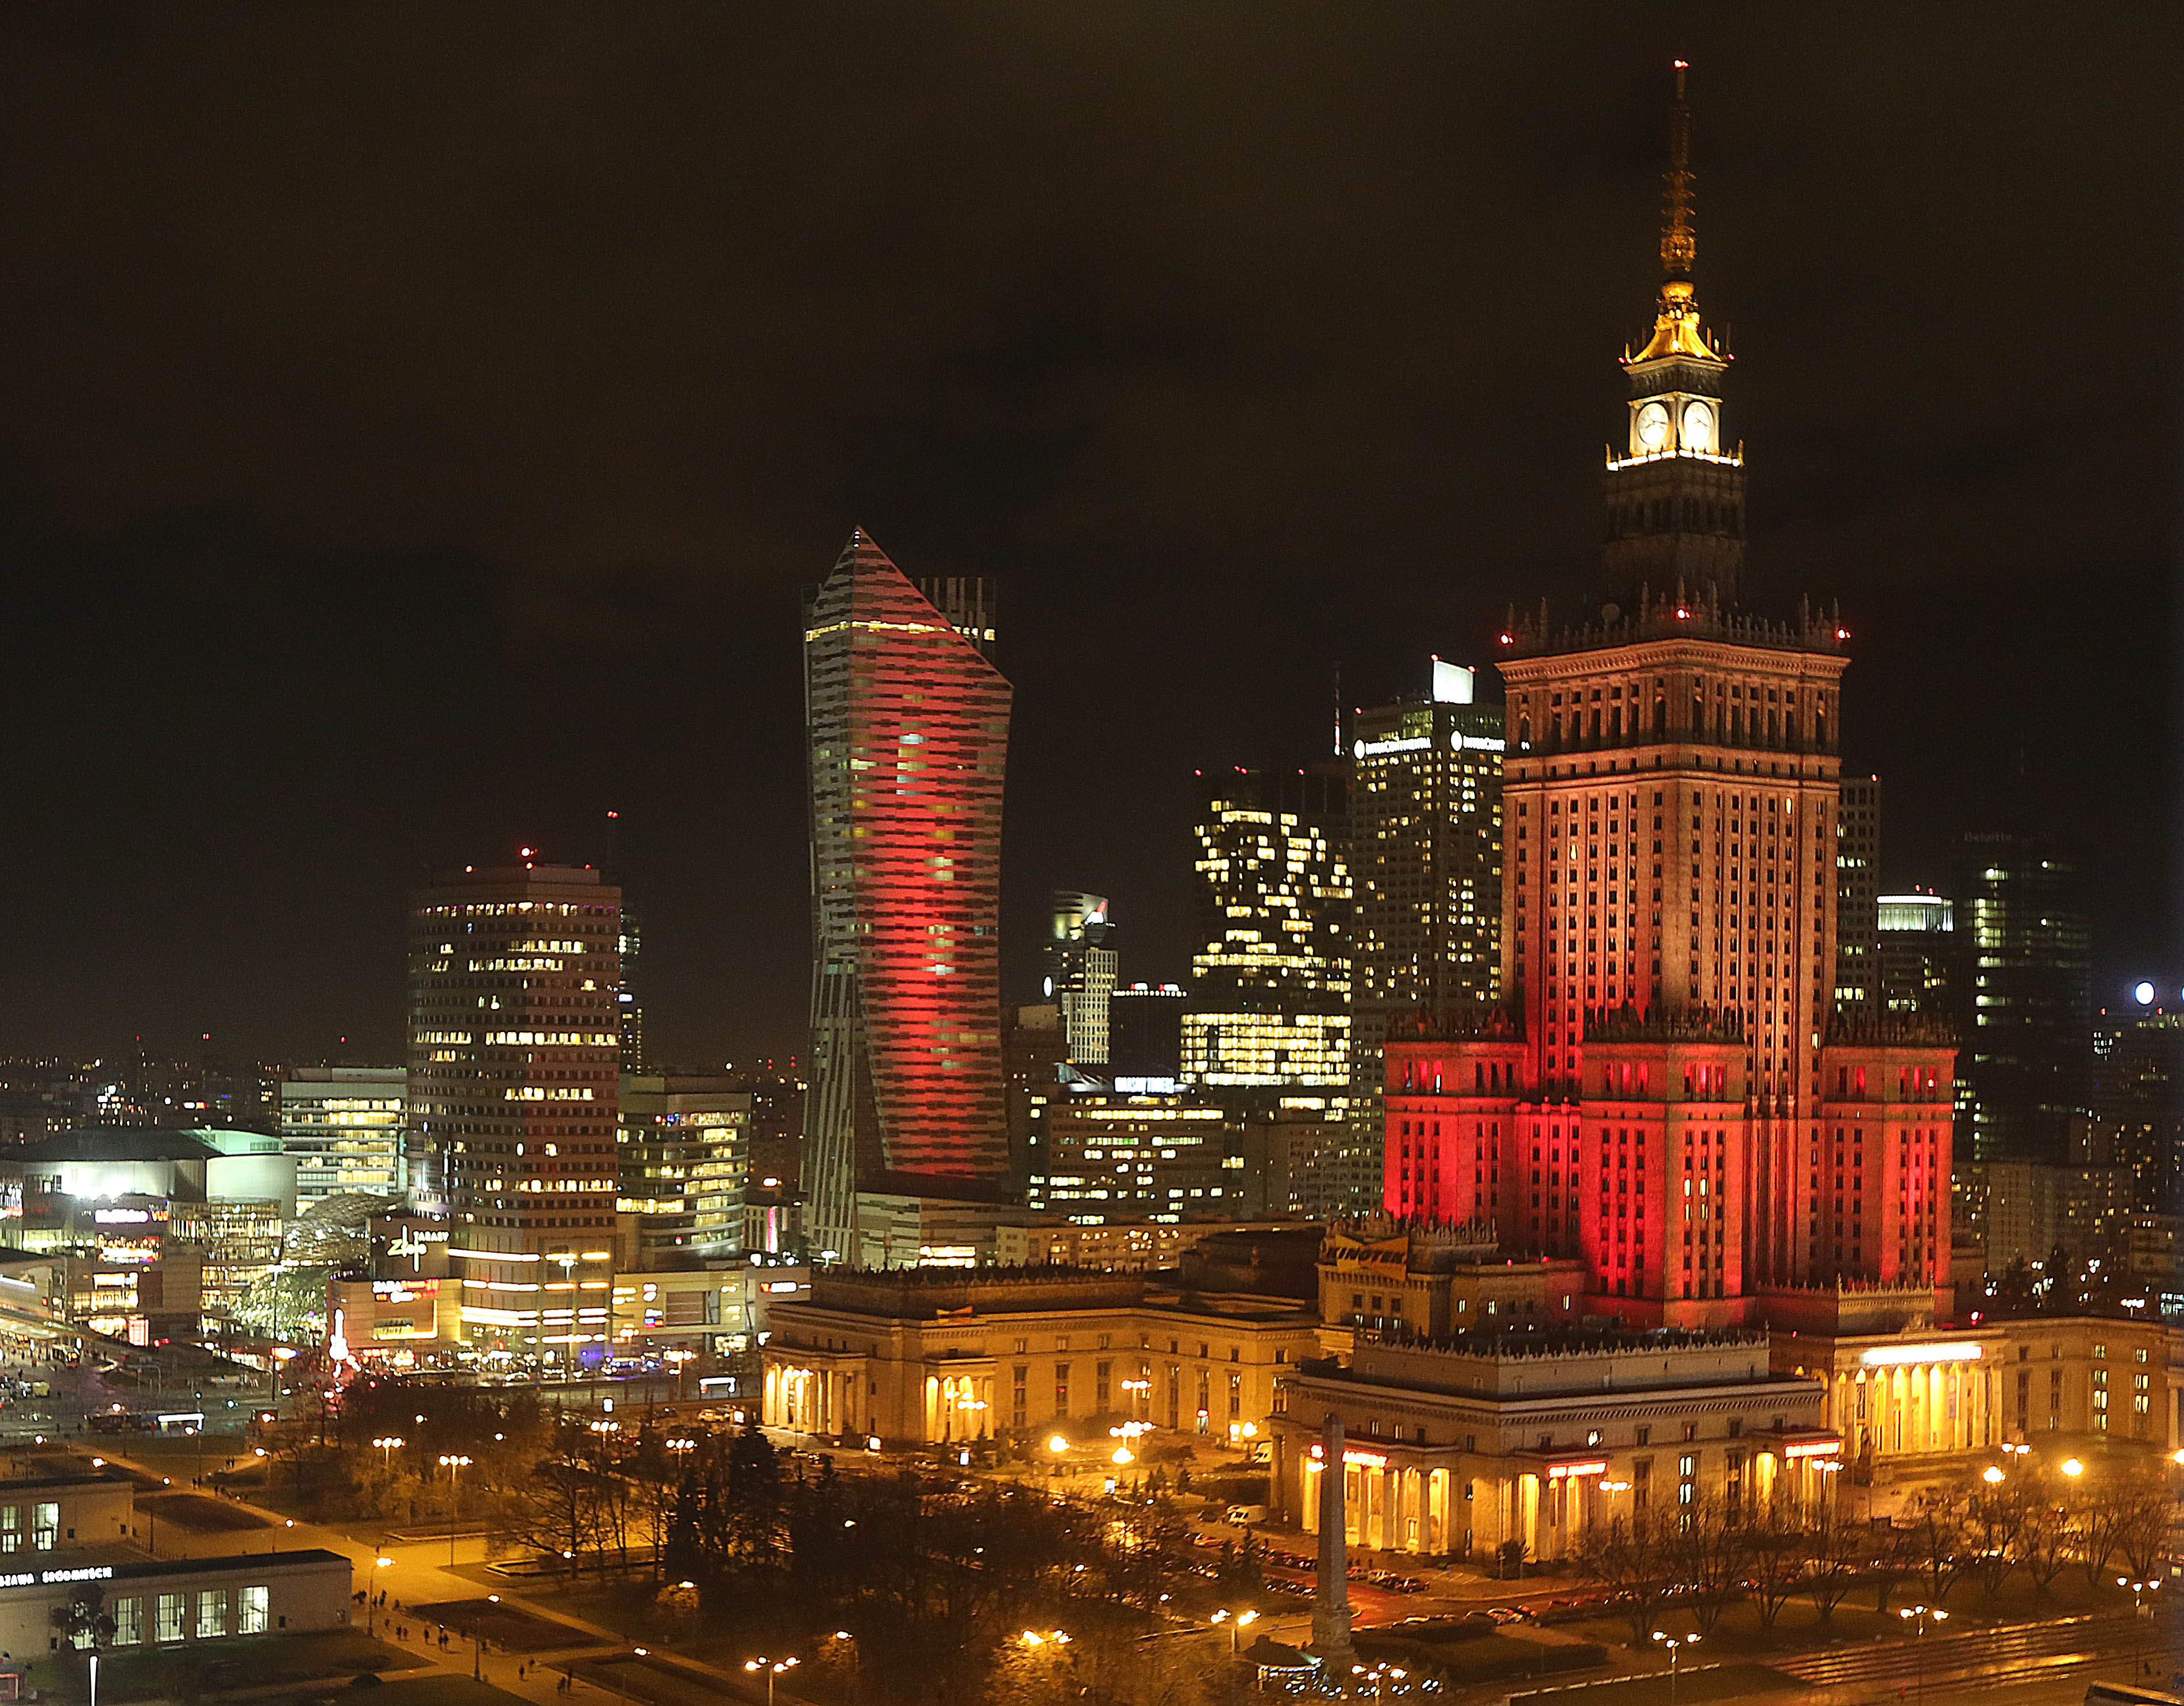 The Palace of Culture, right, is lit in the colors of the Belgian flag on March 22, 2016 in Warsaw, Poland.